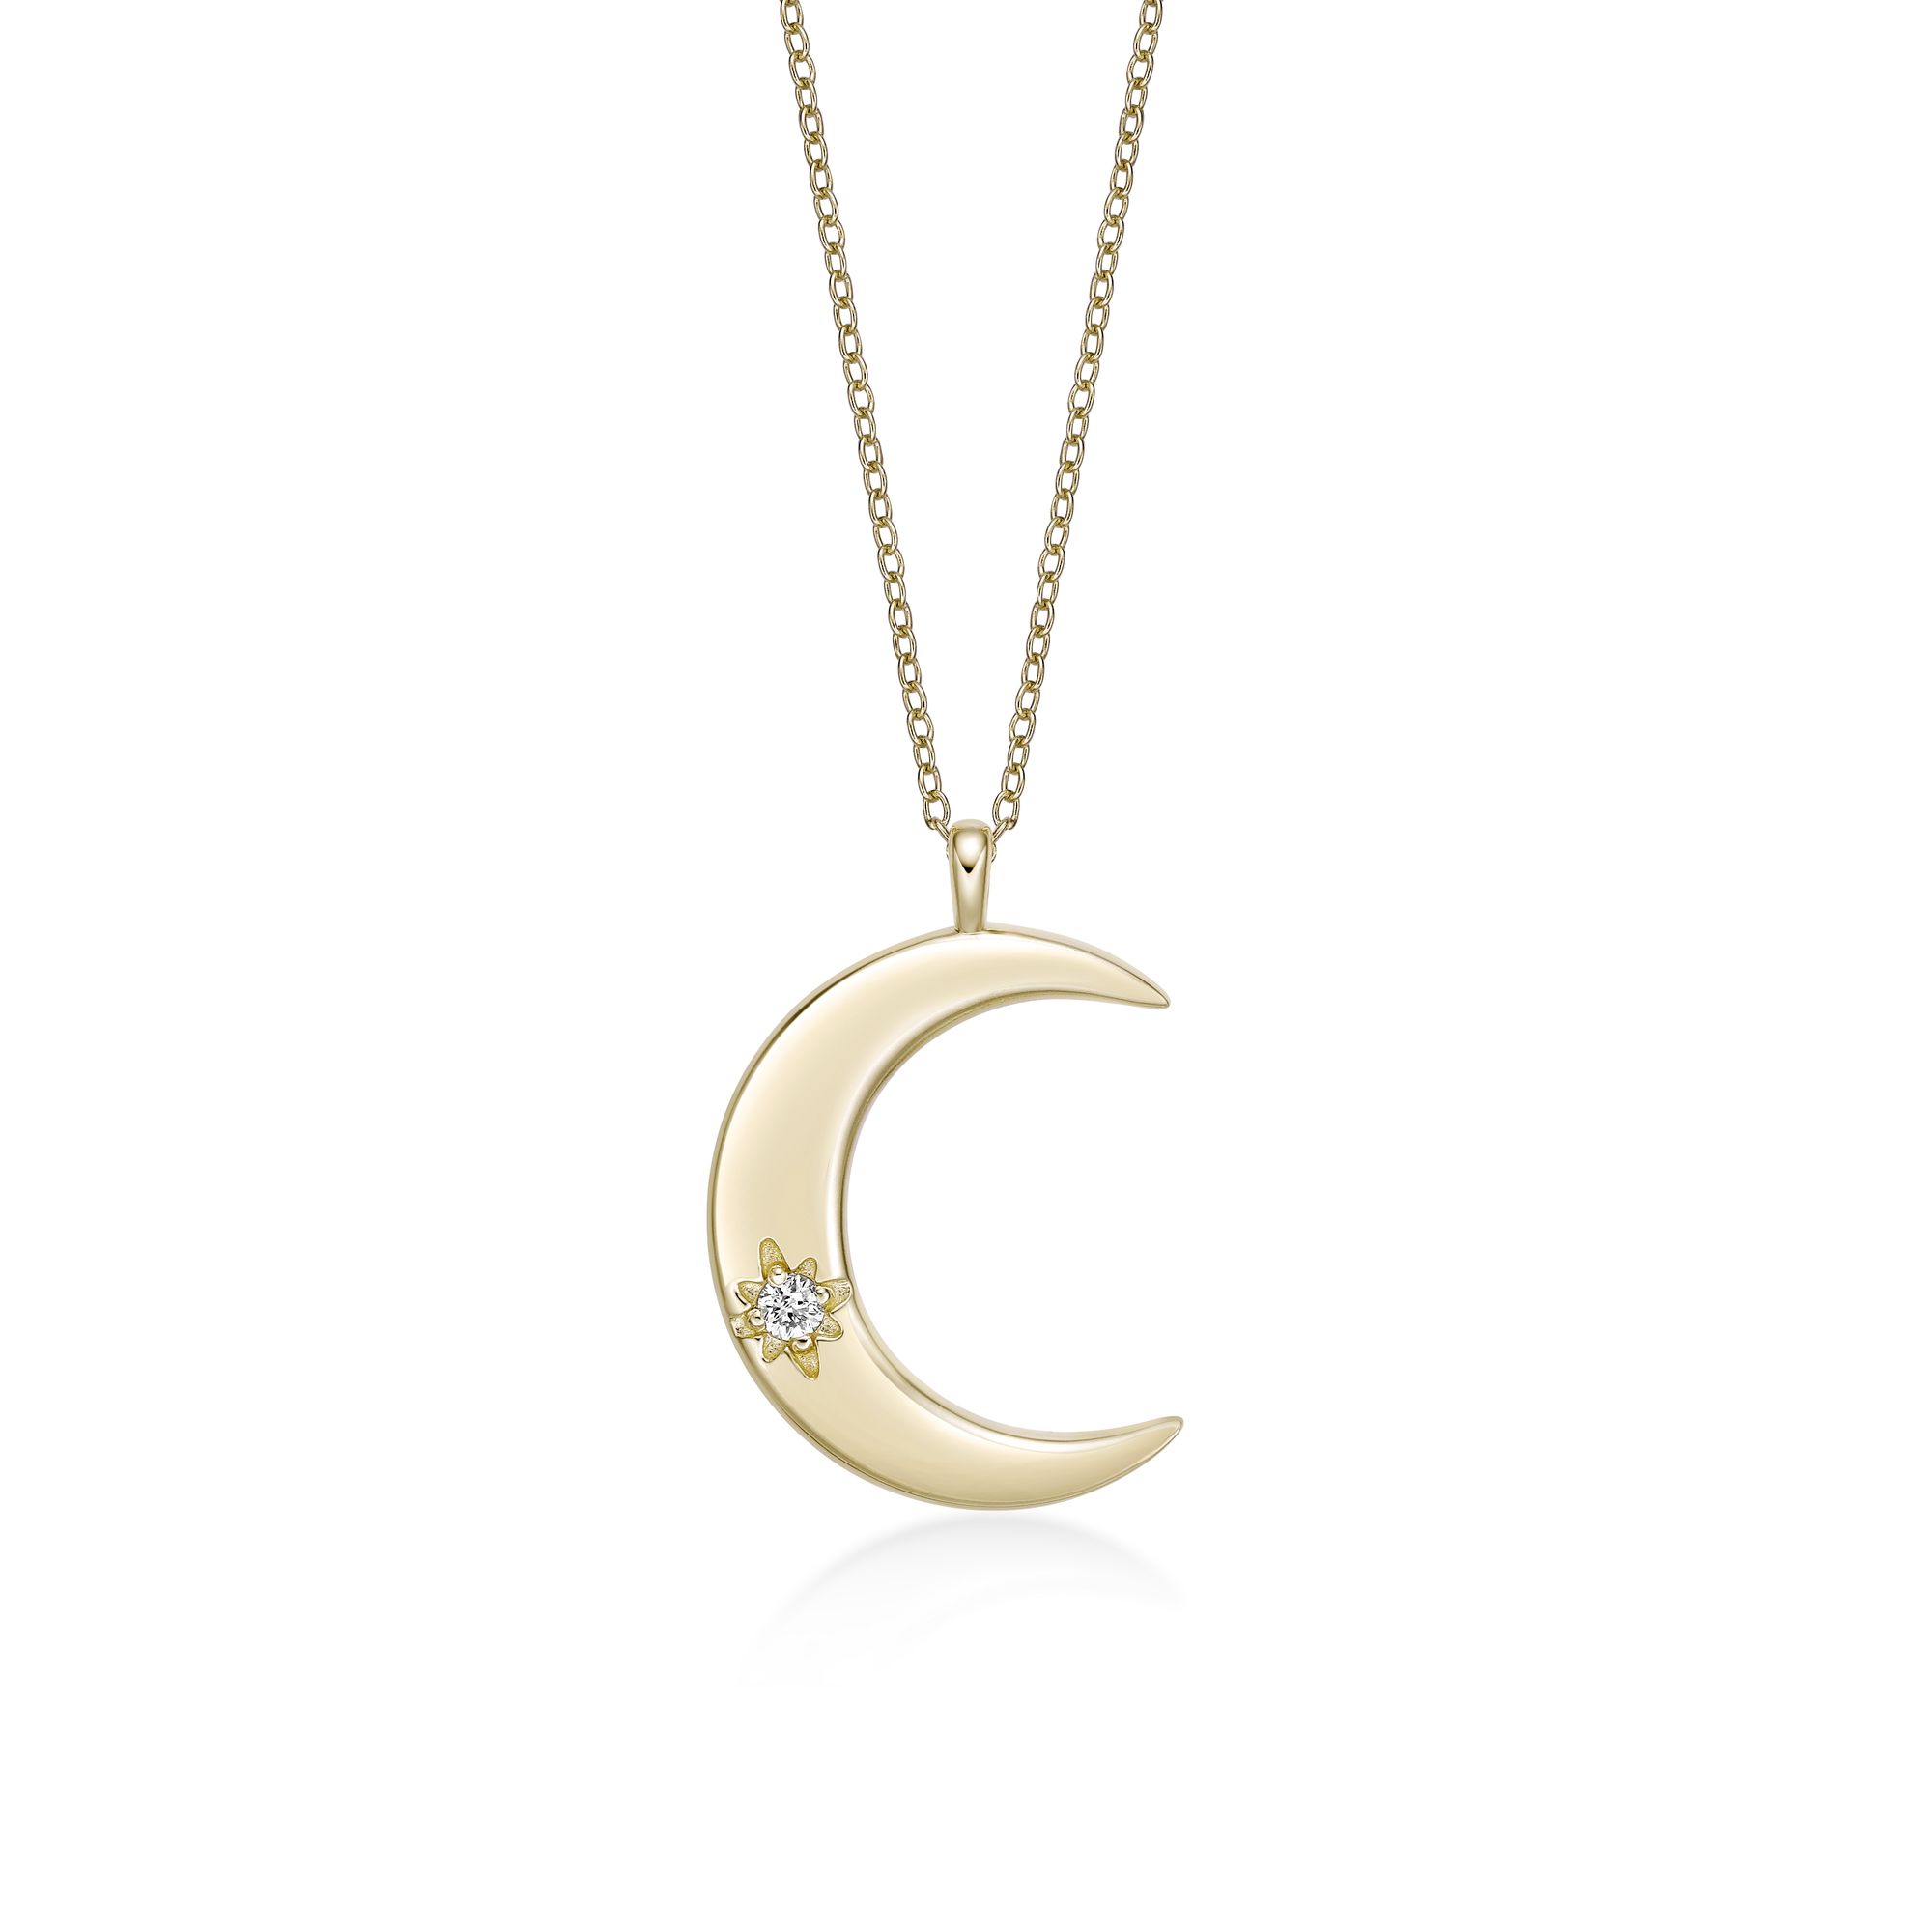 Women's Lab Grown Diamond Moon Pendant Necklace in 18K Yellow Gold-Plated Sterling Silver with Lobster Clasp, 0.05 Carat, 18" Cable Chain | Lavari Jewelers